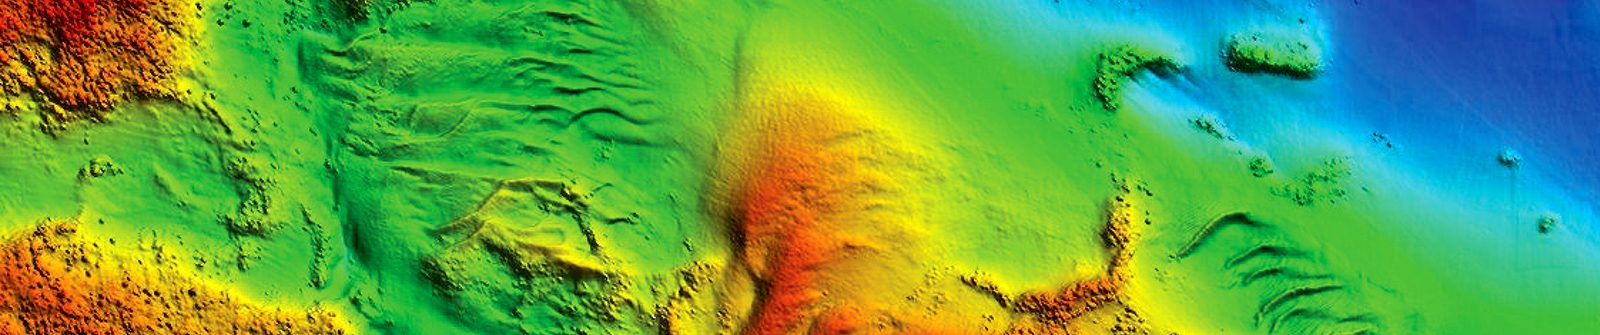 An image of high resolution bathymetry using various colors to represent seafloor elevation.